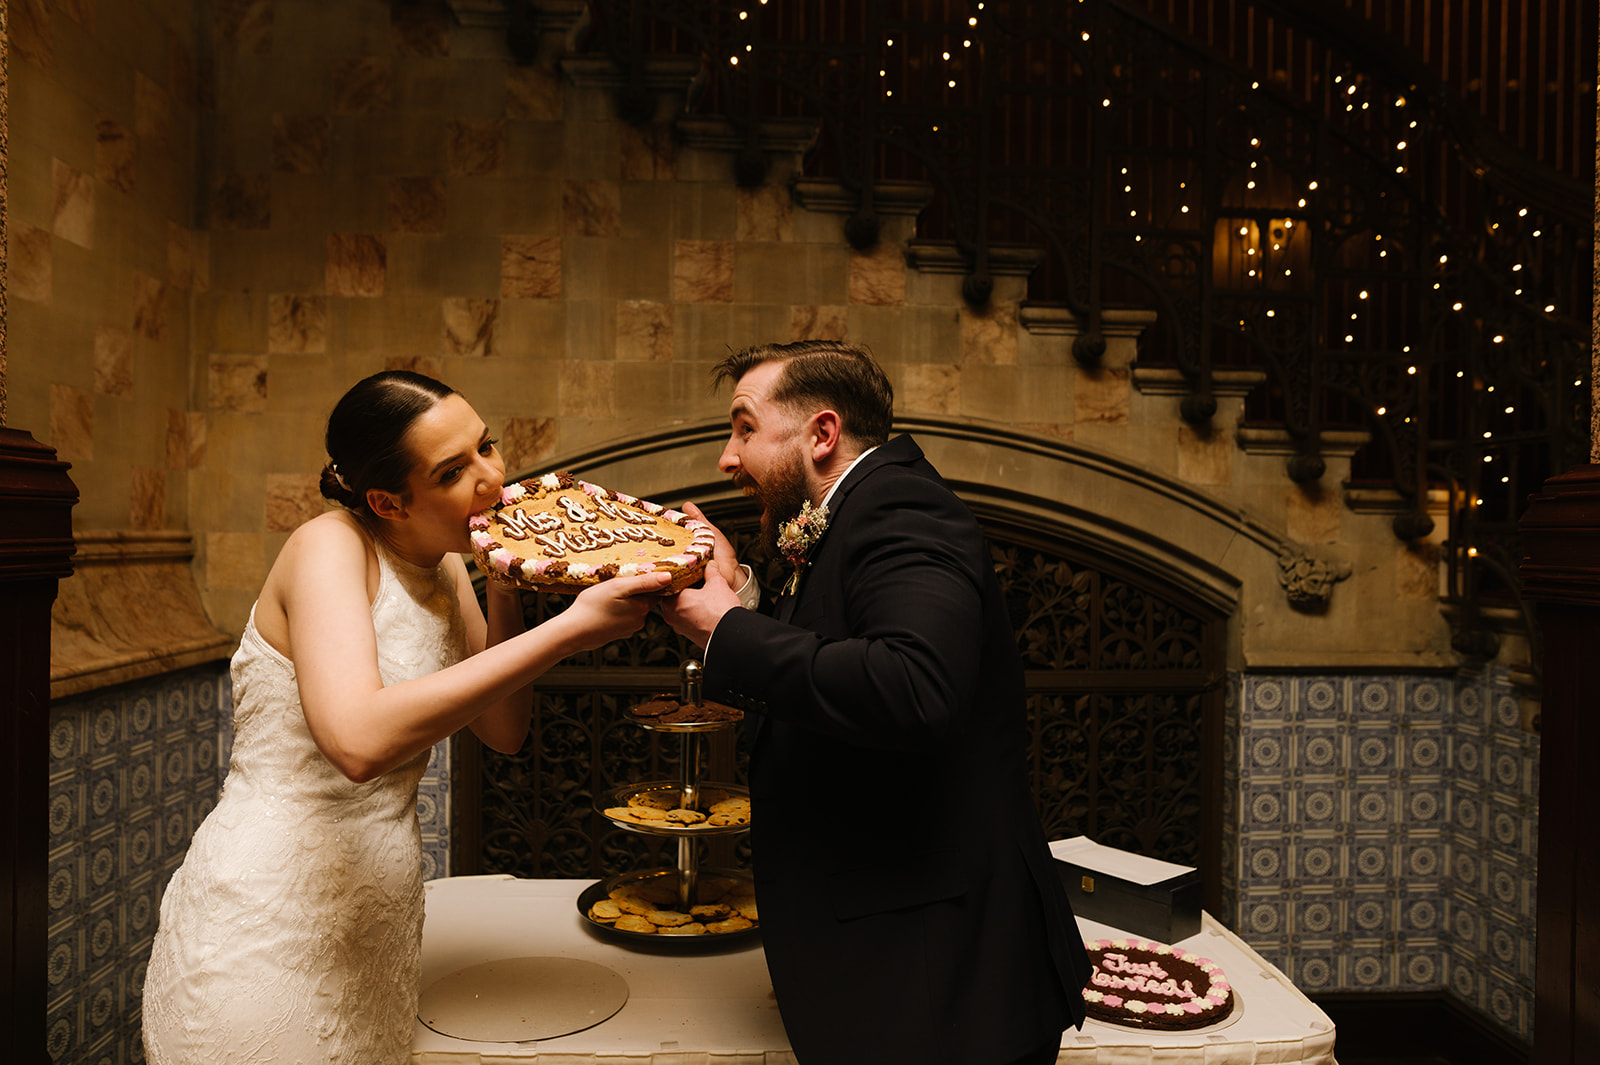 The bride and groom take a bite from their wedding cookie